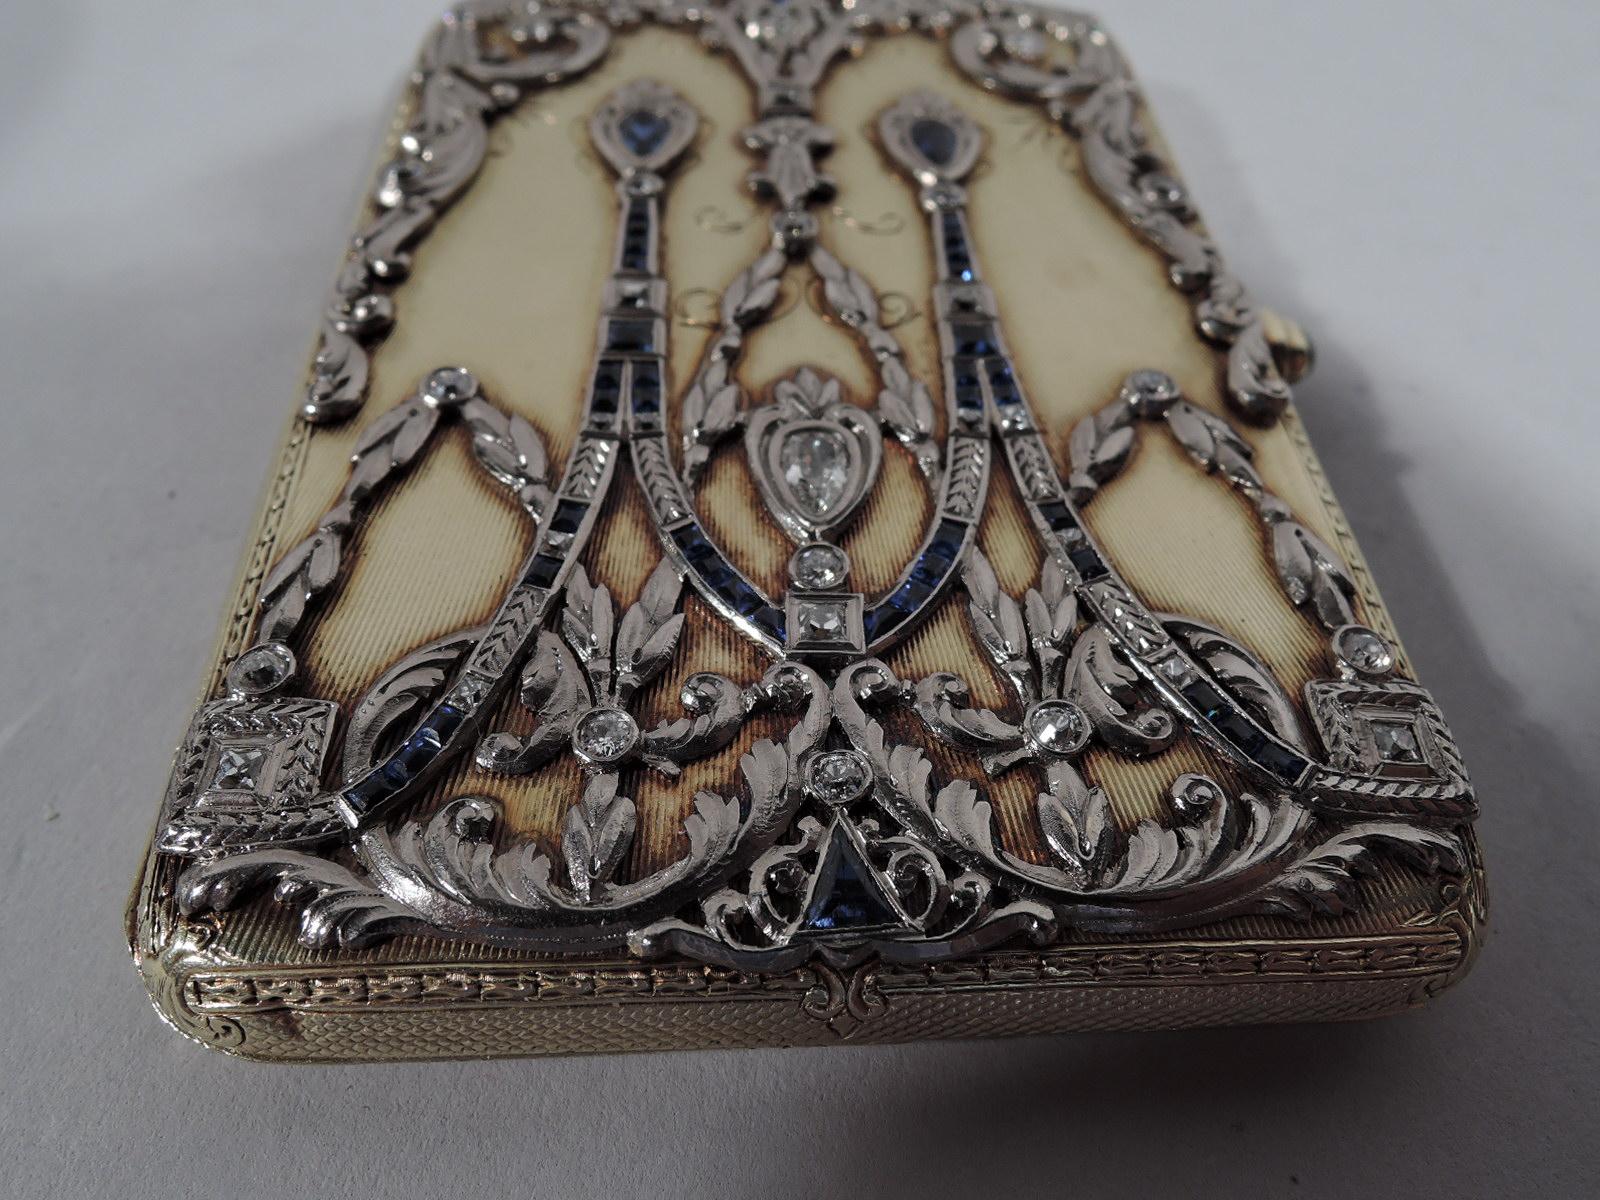 Rose Cut Sumptuous Antique Tiffany 14 Karat Gold Card Case with Sapphires and Diamonds